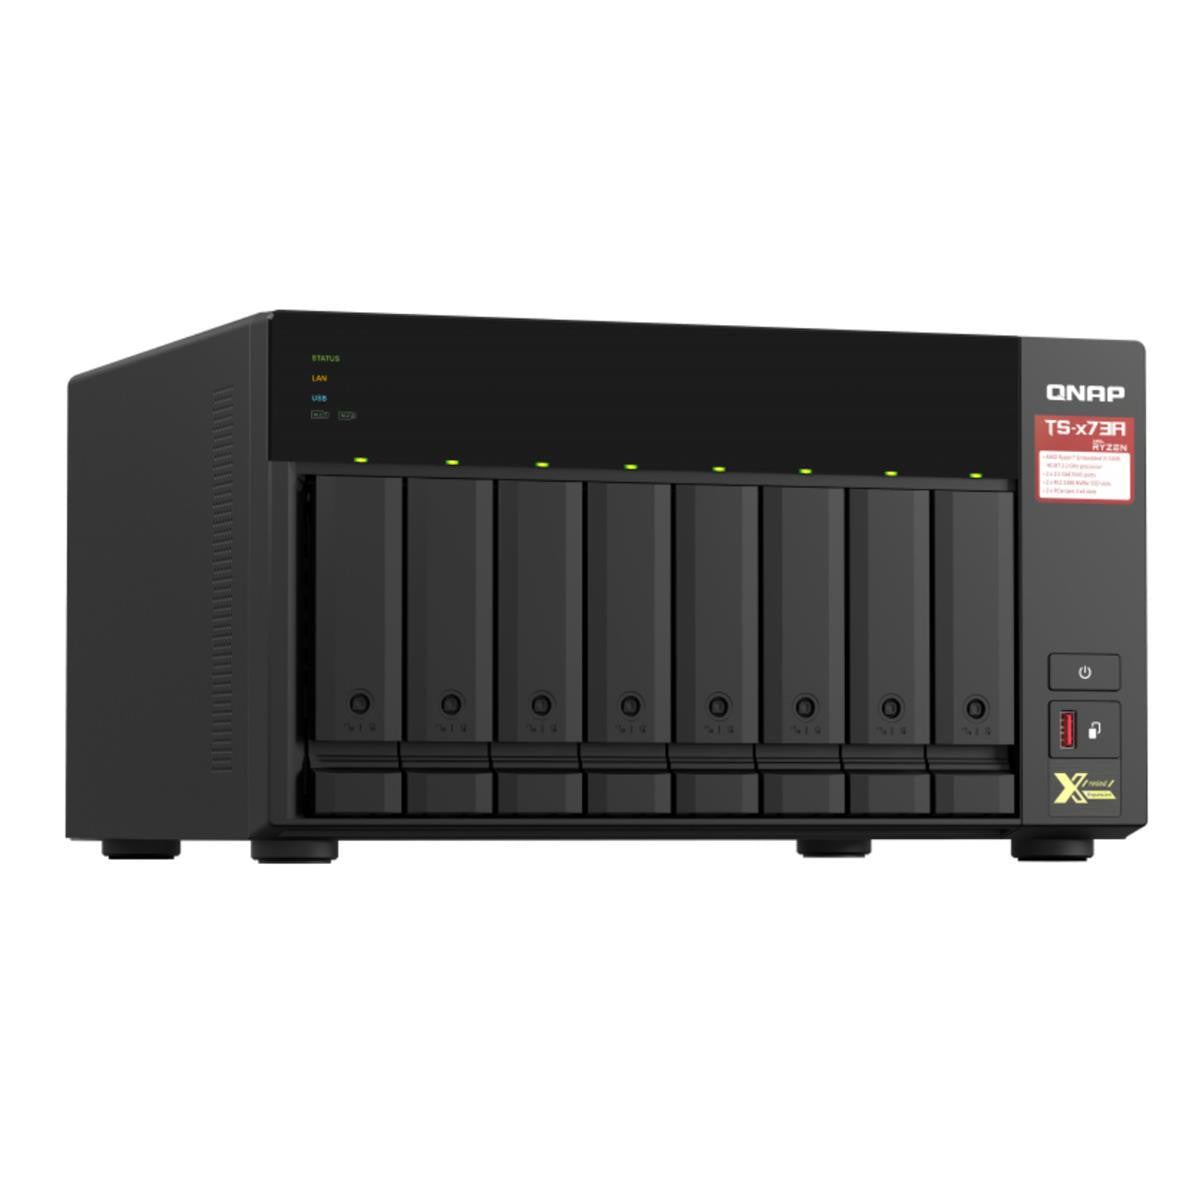 QNAP TS-873A 8-BAY NAS with 16GB DDR4 RAM and 32TB (8x4TB) Seagate Ironwolf NAS Drives Fully Assembled and Tested